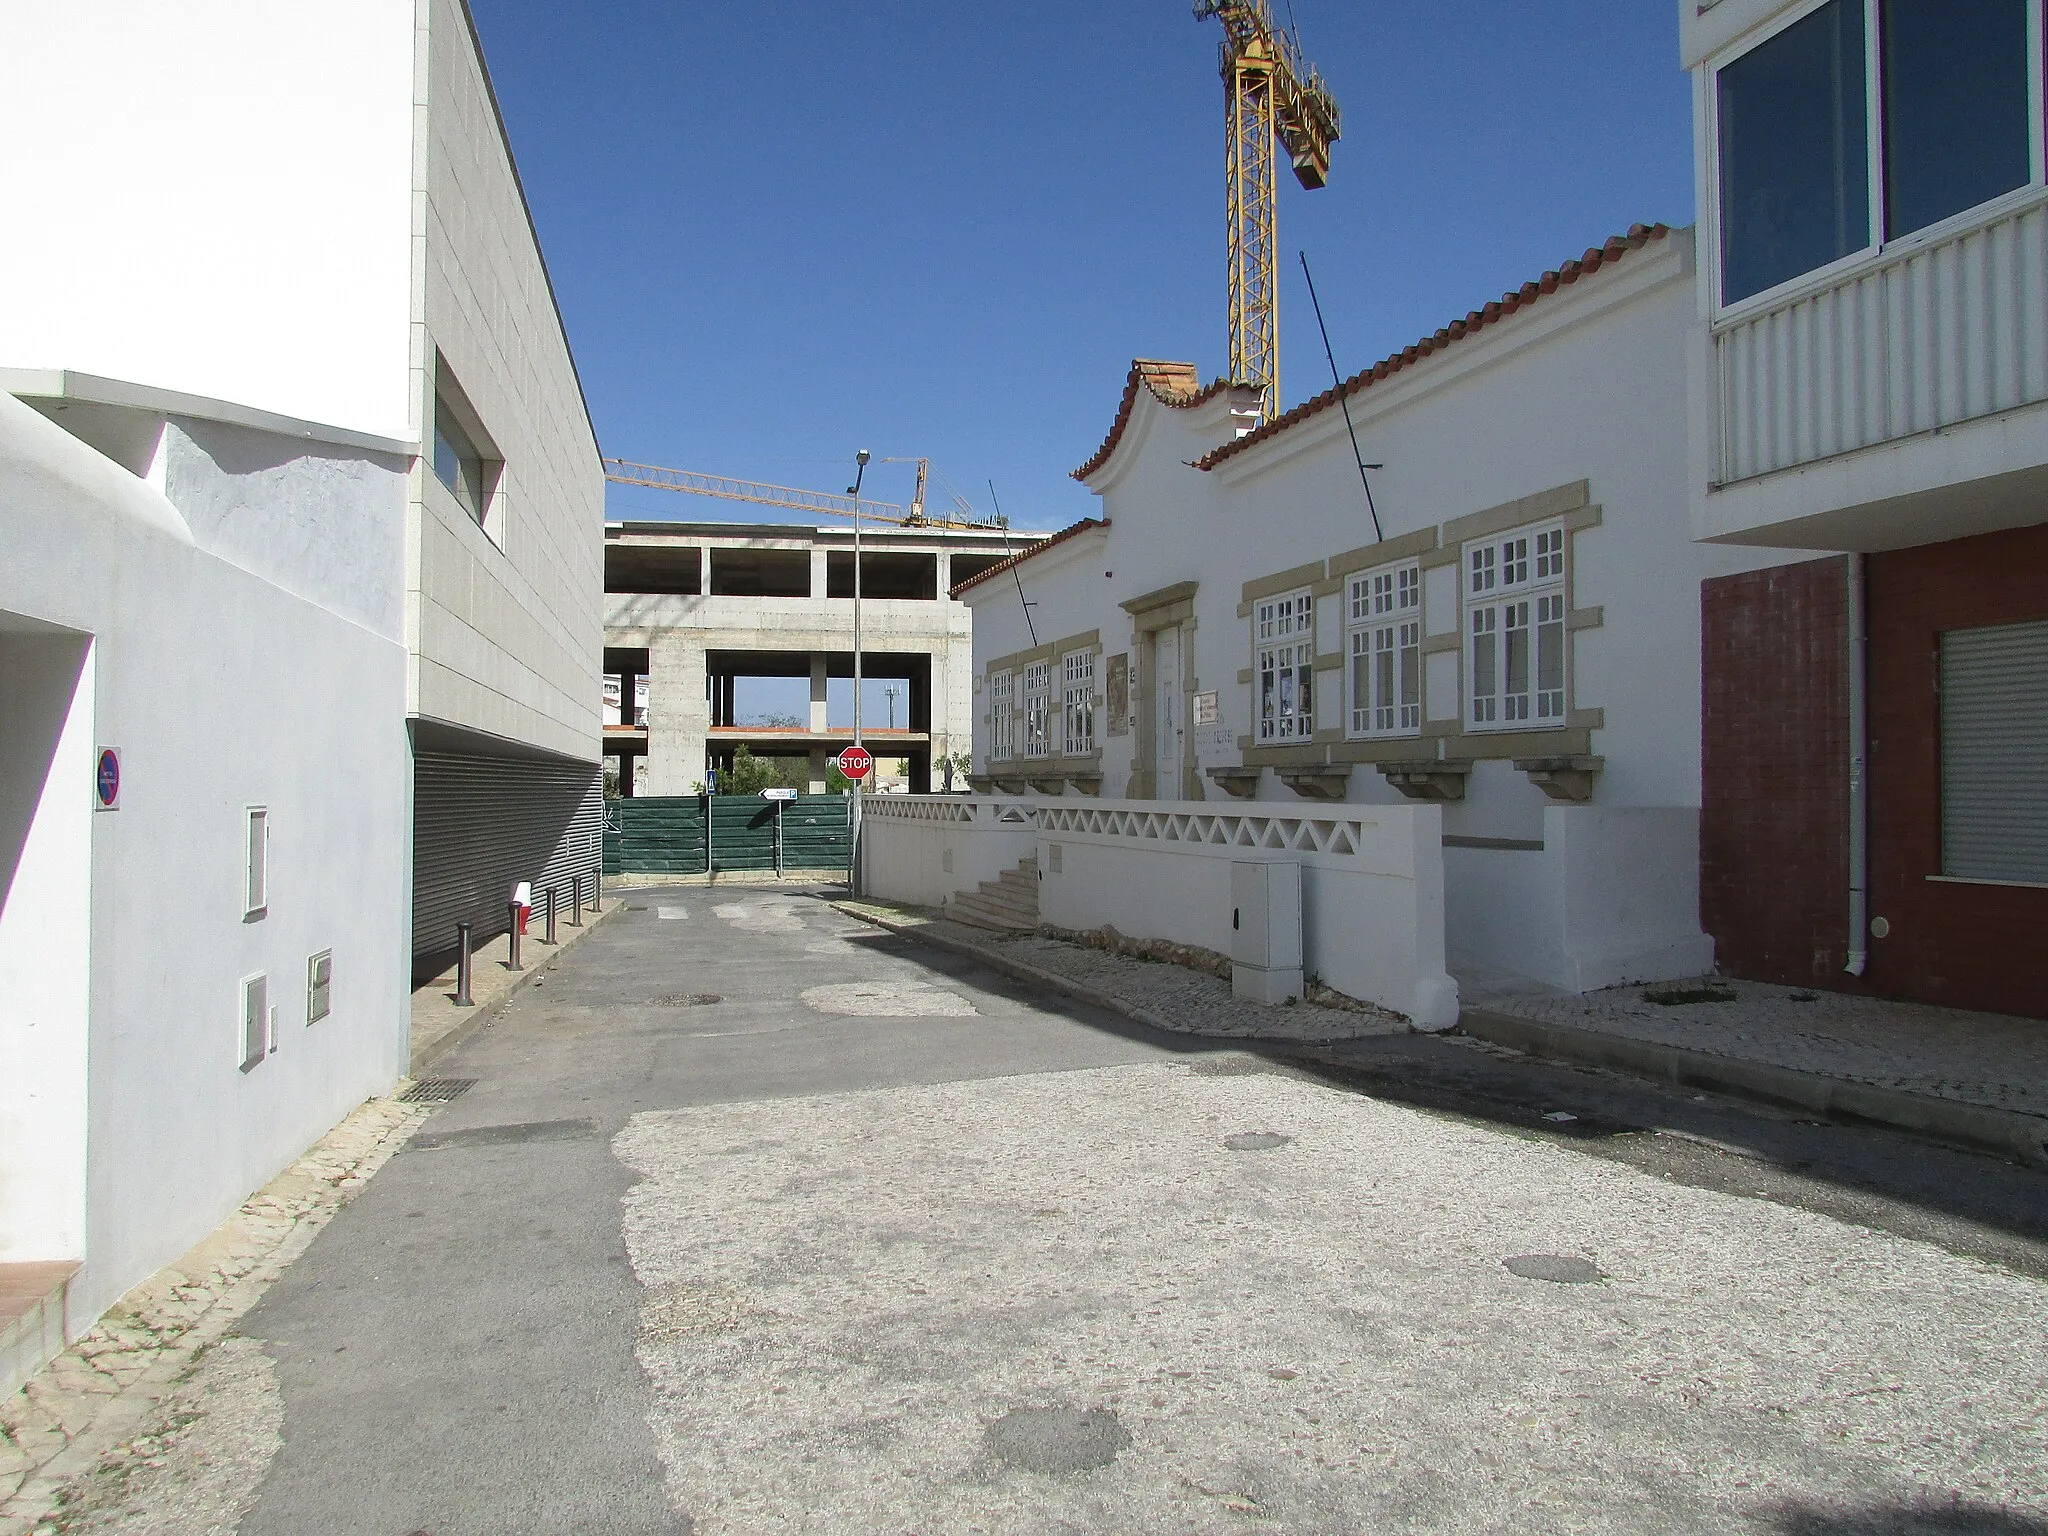 Photo showing: Looking north towards the end of the Rua da Escola within the village of Pêra, Algarve, Portugal.